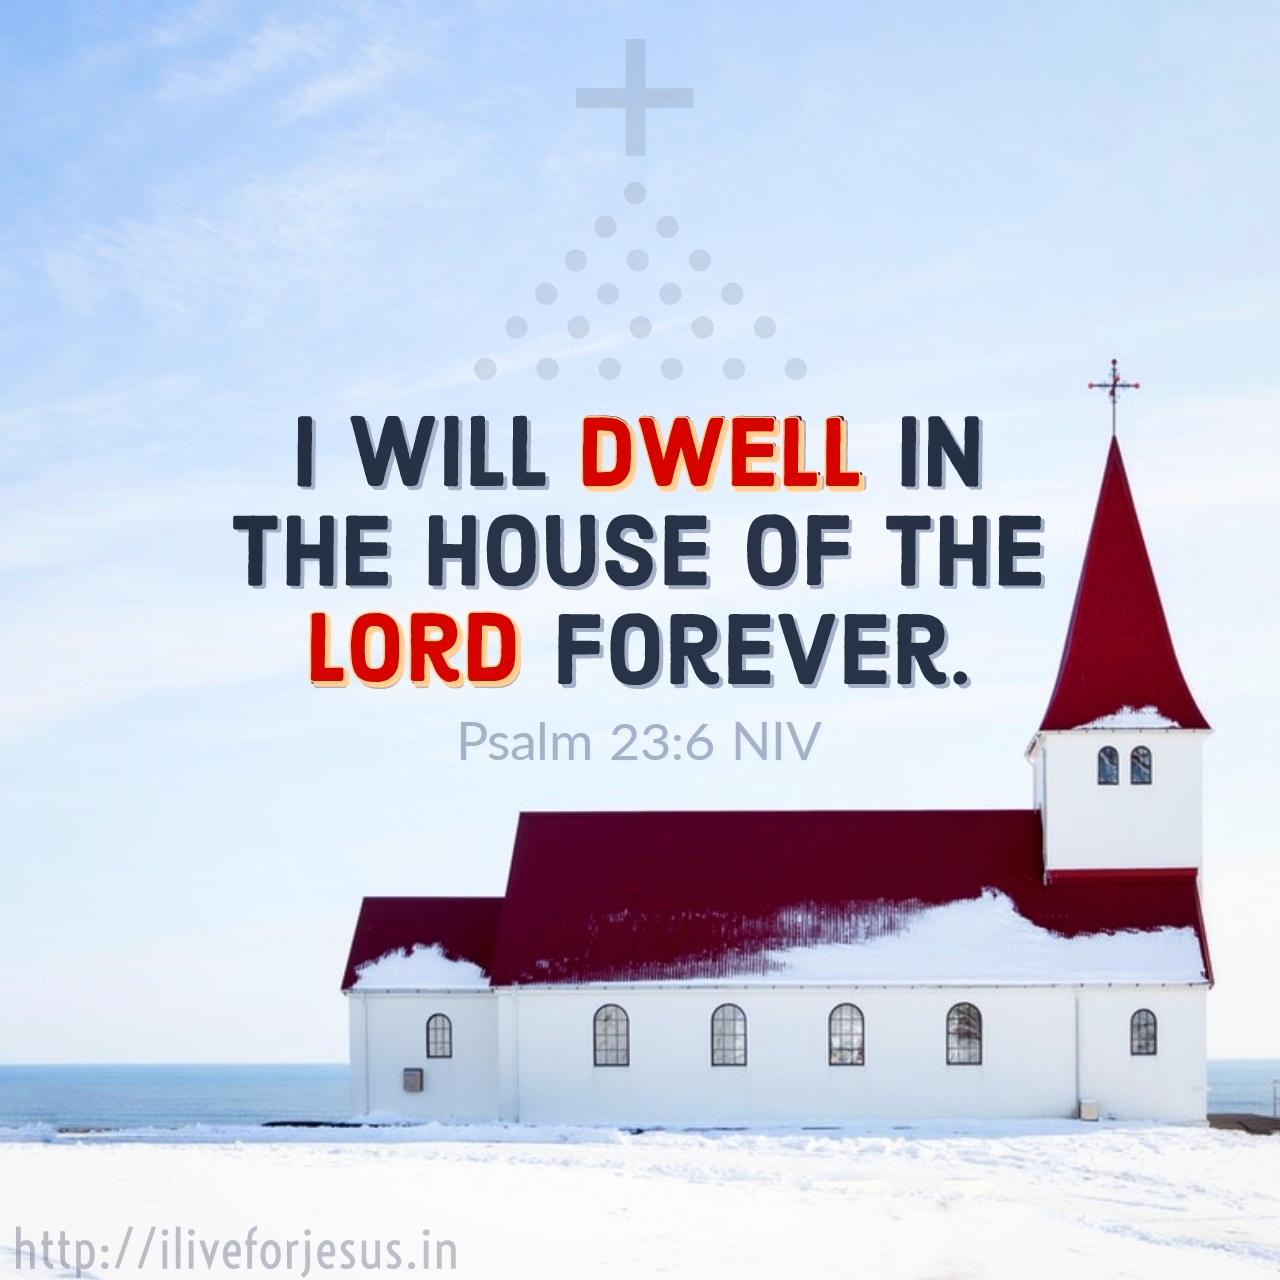 I will dwell in the house of the Lord forever. Psalm 23:6 NIV